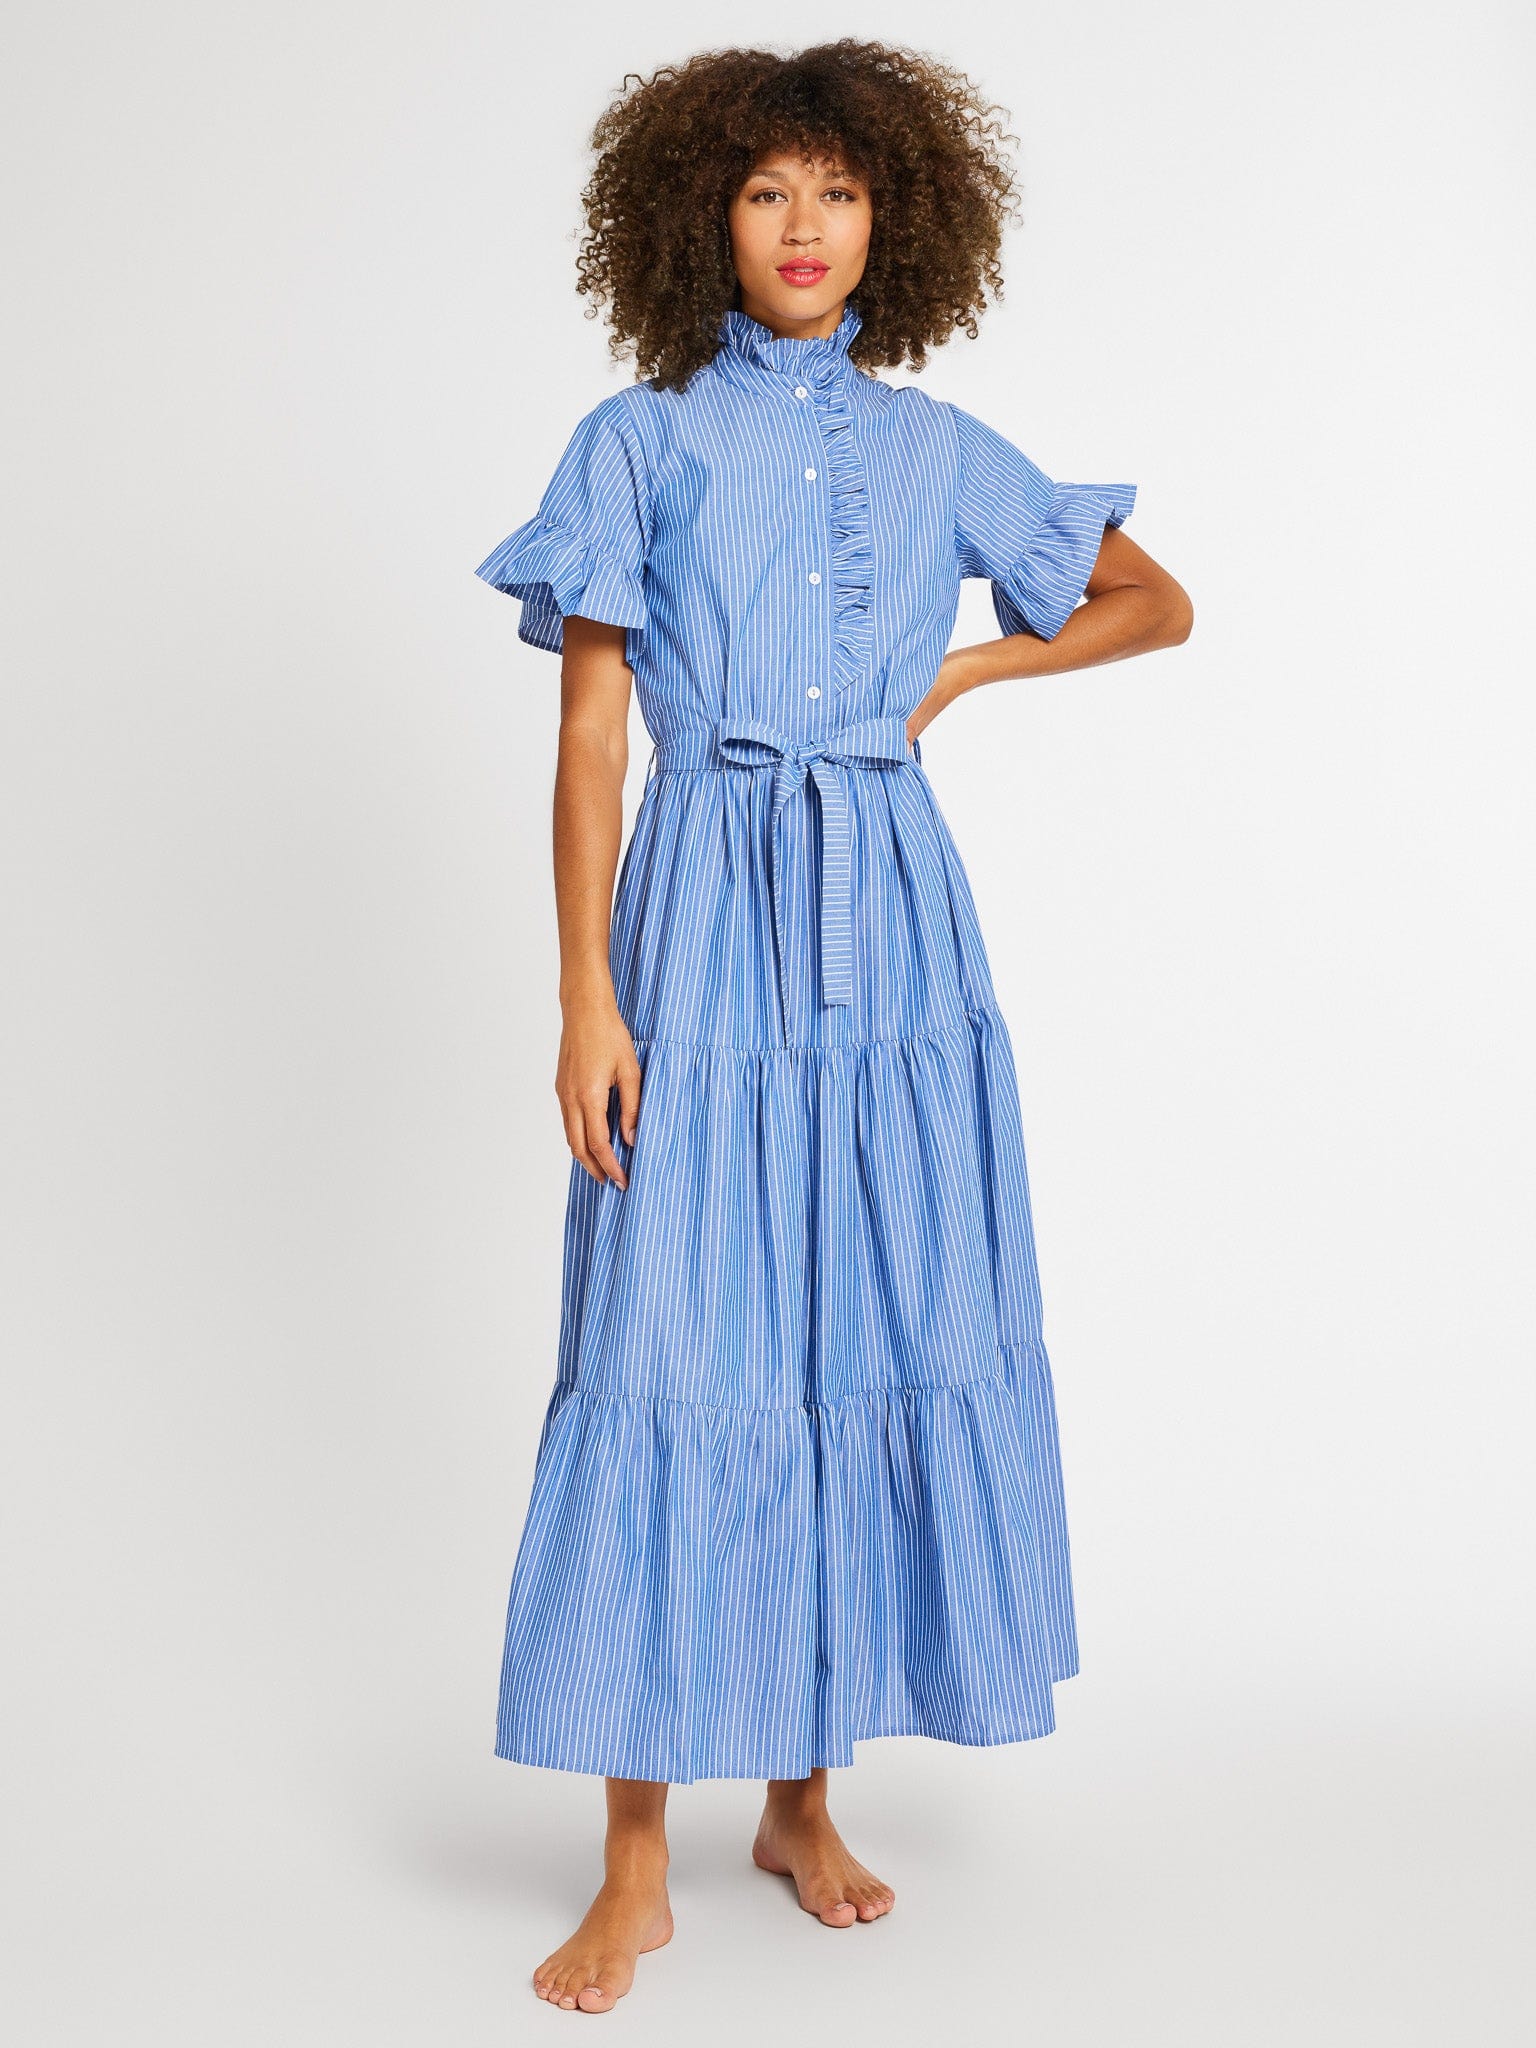 MILLE Clothing Victoria Dress in Harbor Stripe